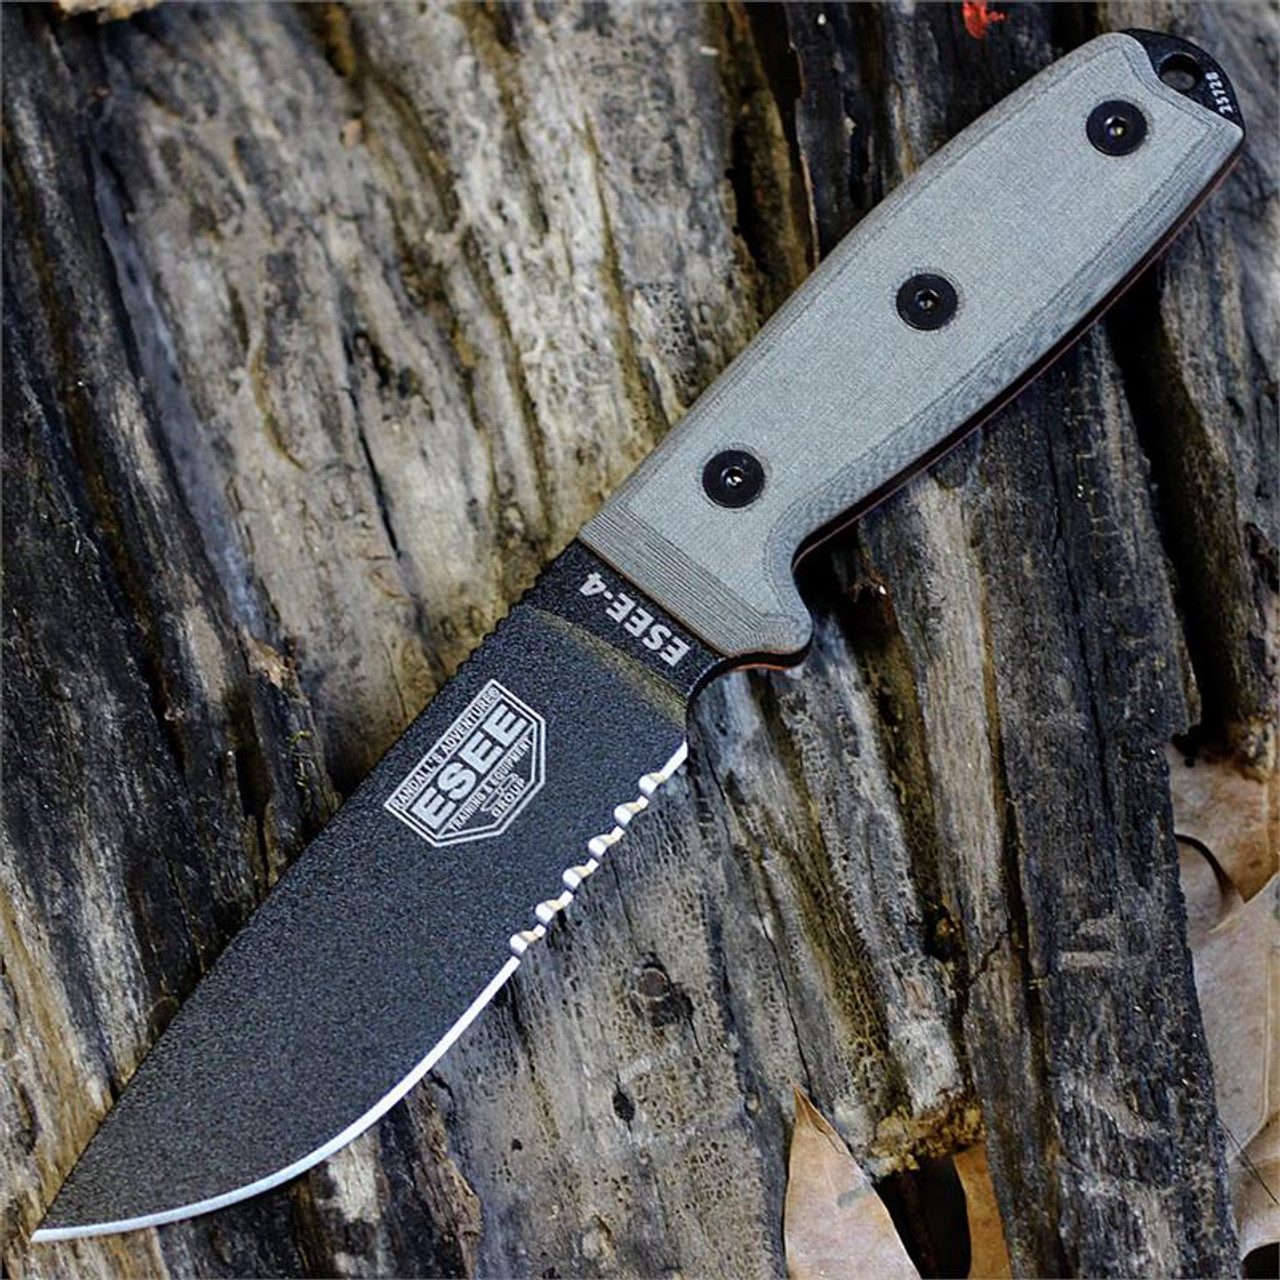 ESEE-4 Fixed Blade Knife (ESEE-4S-MB)- 4.50" Black Partially Serrated 1095 Drop Point Blade, Gray Micarta Handle